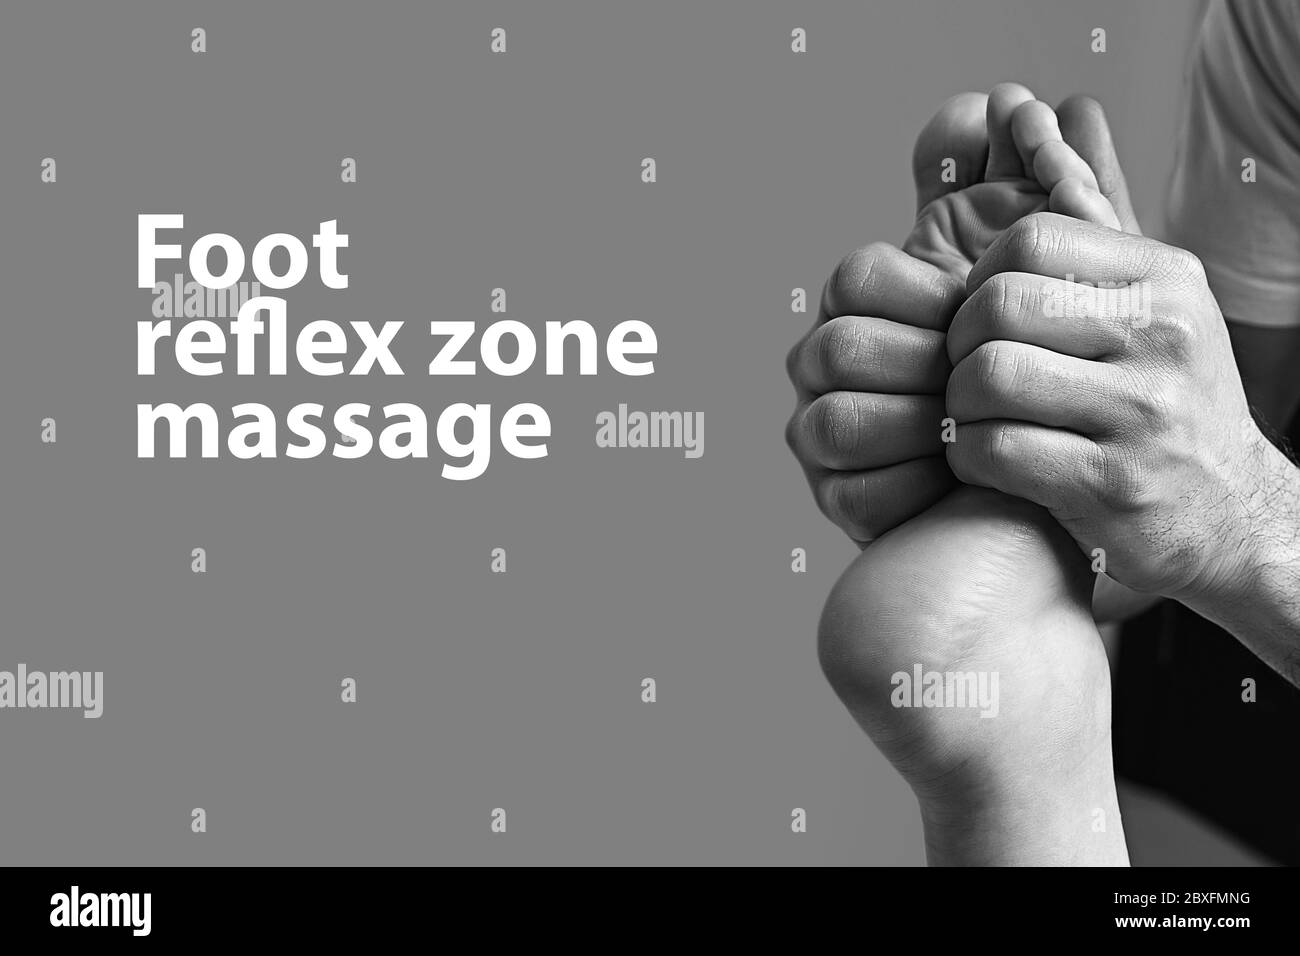 Male masseur doing massage on female foot reflex zone in the spa salon. Copy space with sample text on light grey background. Stock Photo